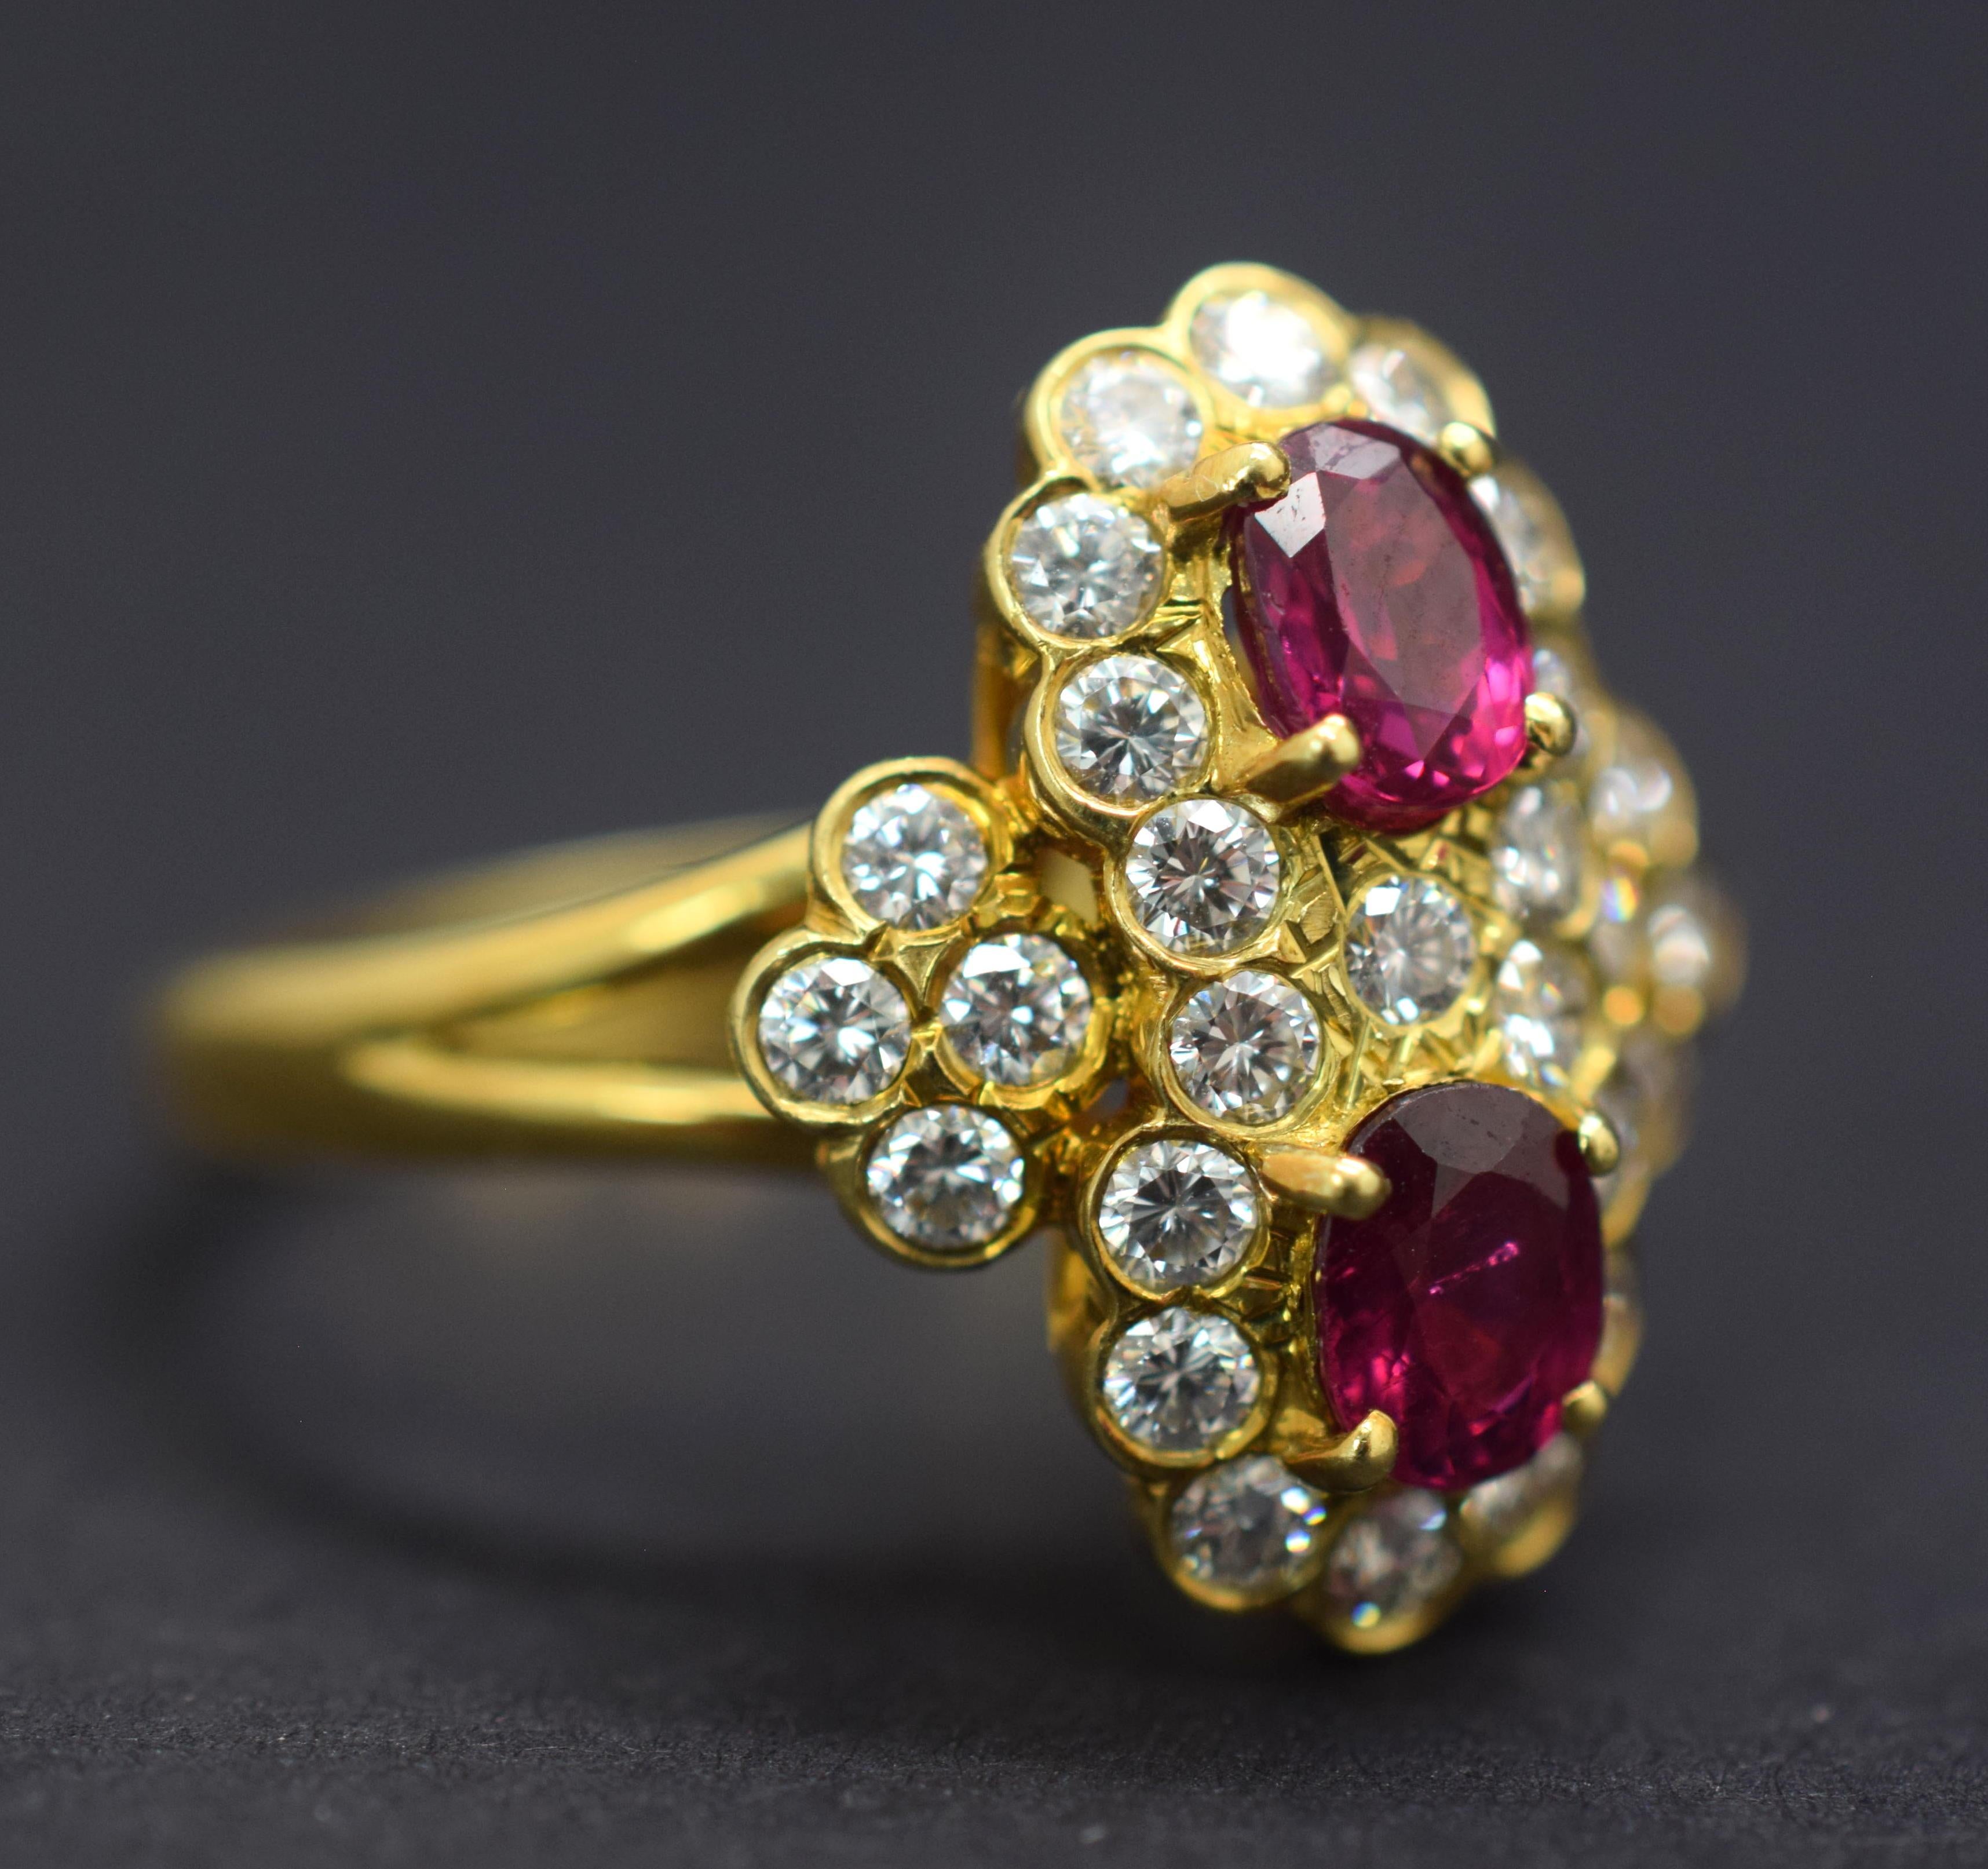 Gorgeous Ruby and Diamond ring crafted in 18k yellow gold.  This split shank ring is truly a estate masterpiece.  The focal point of the ring are two oval cut Ruby gemstones displaying vivid purplish red color and high end clarity. Each Ruby weighs